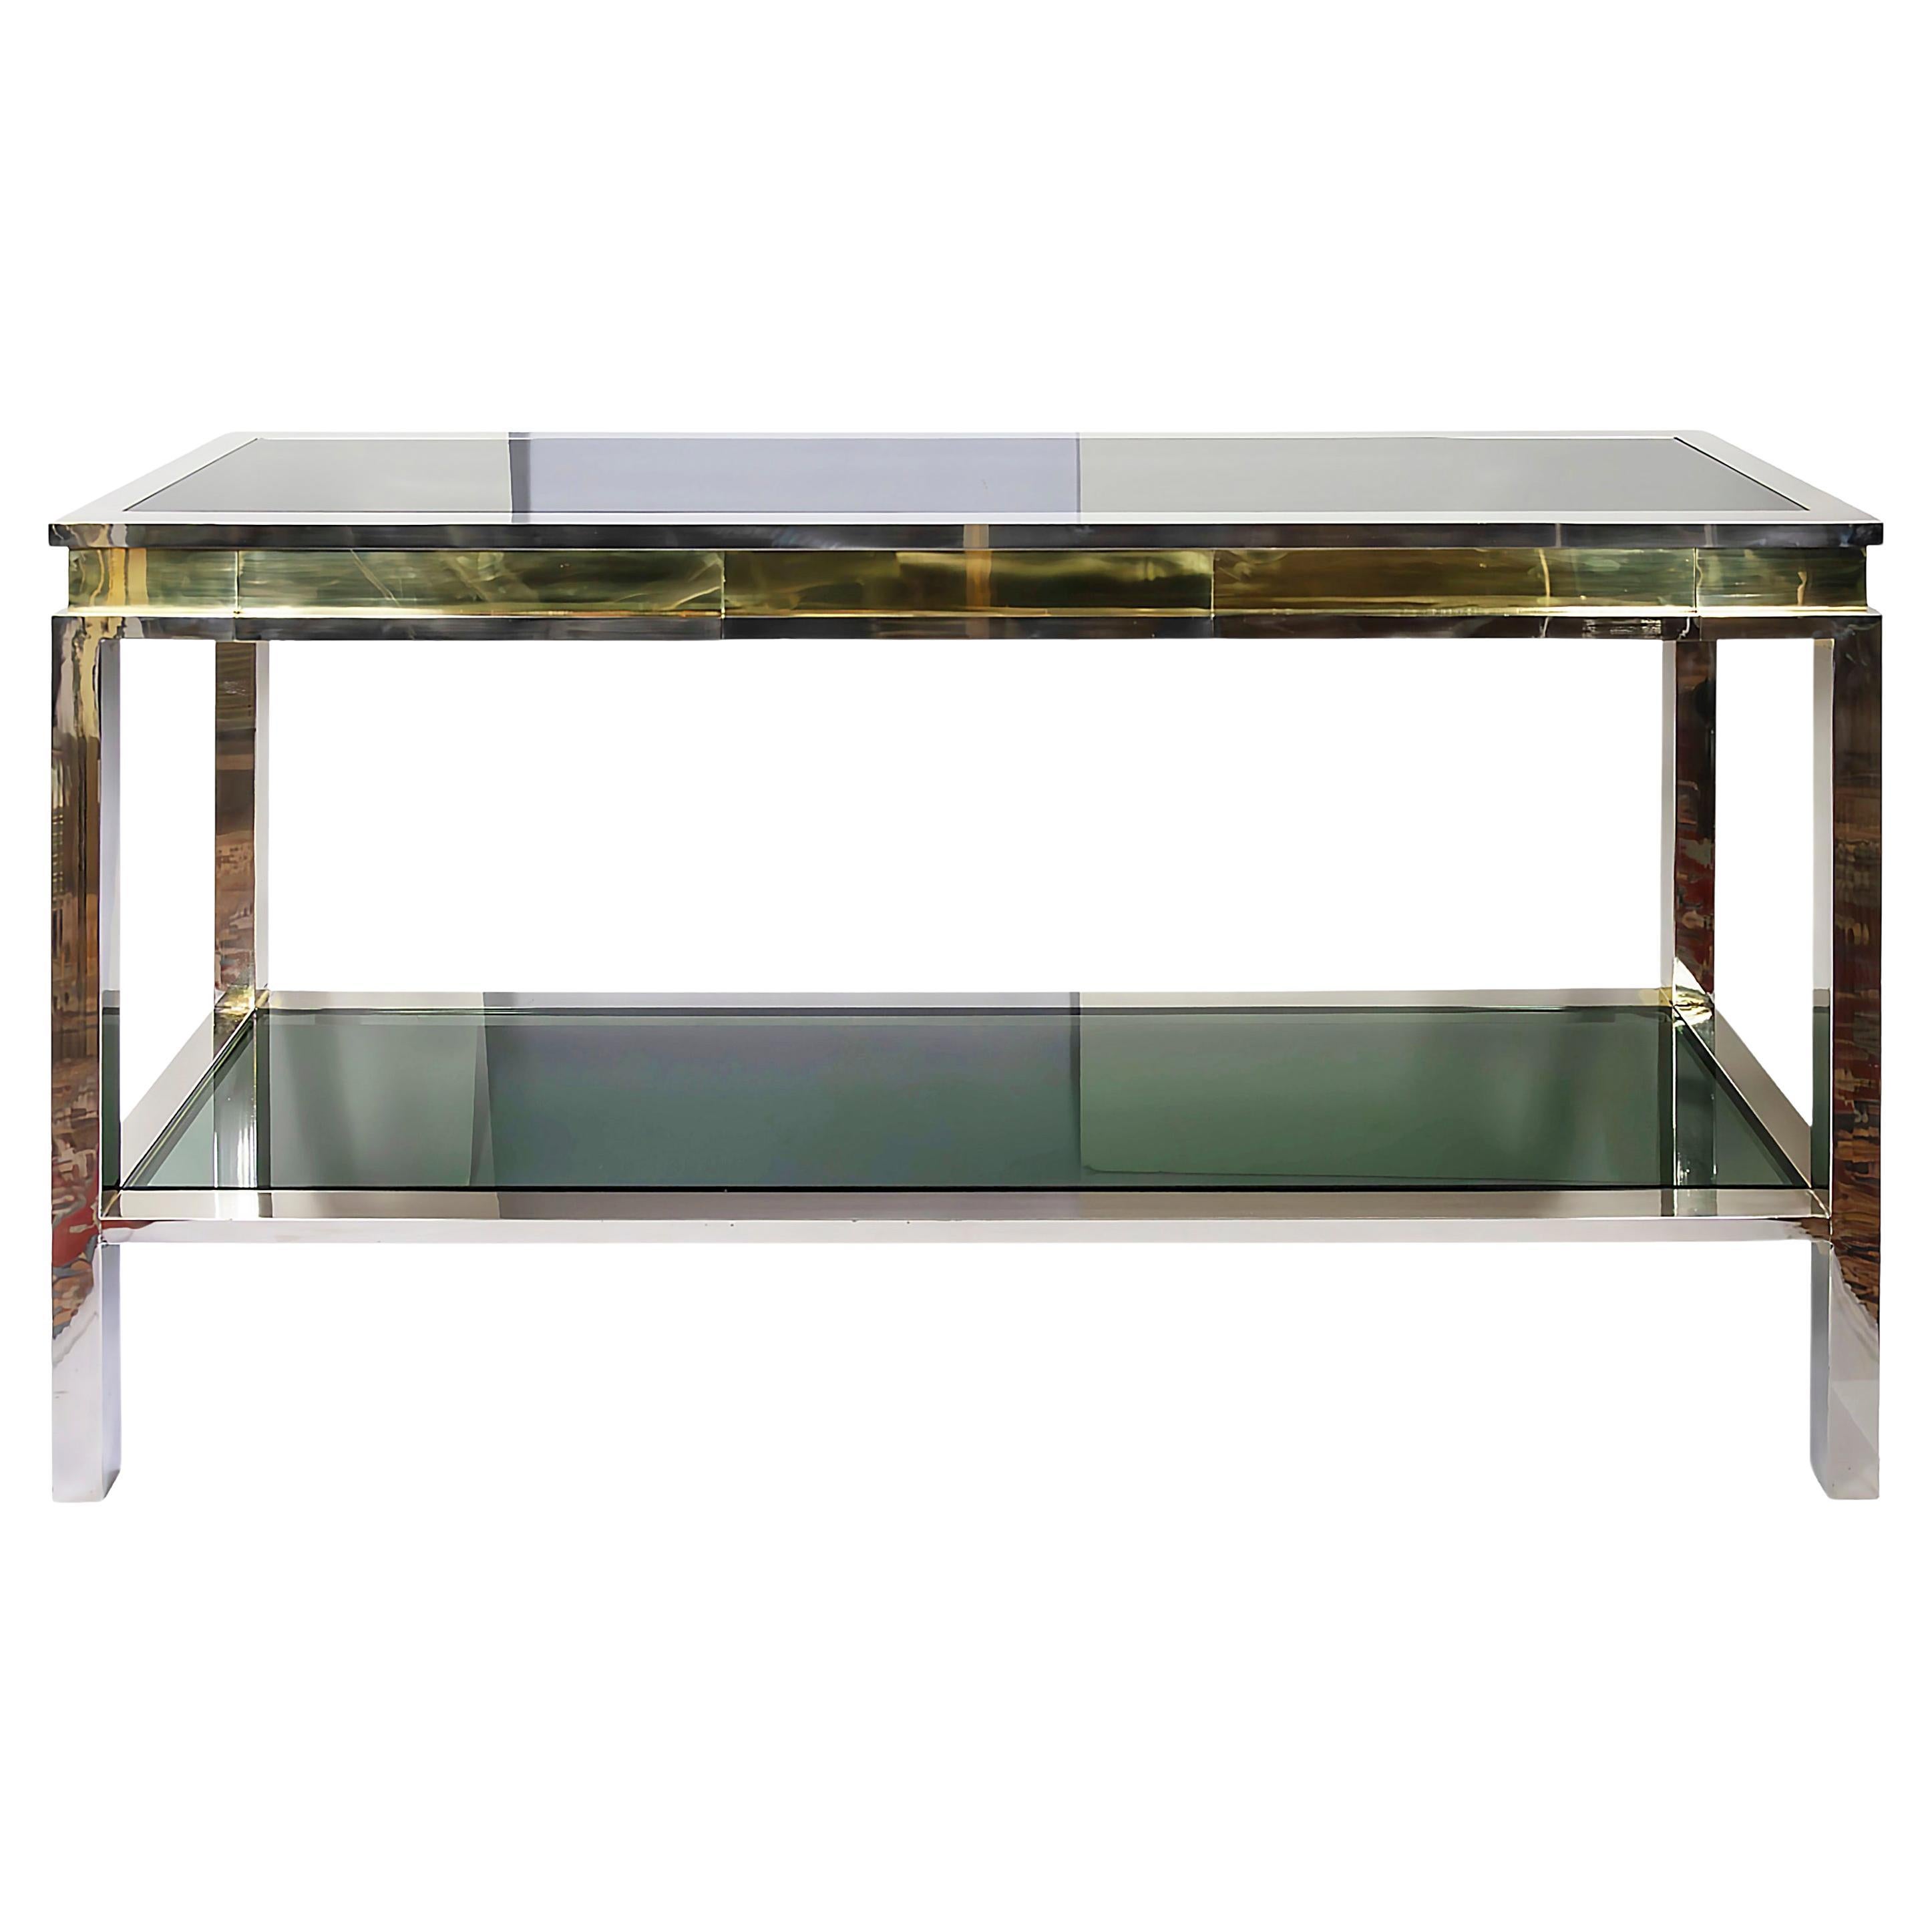 Mid-Century Italian Romeo Rega/Willy Rizzo style console table made of chrome and brass with black/smoky glass top, lower shelve and two drawers.
It is very heavy and solid, very good condition.